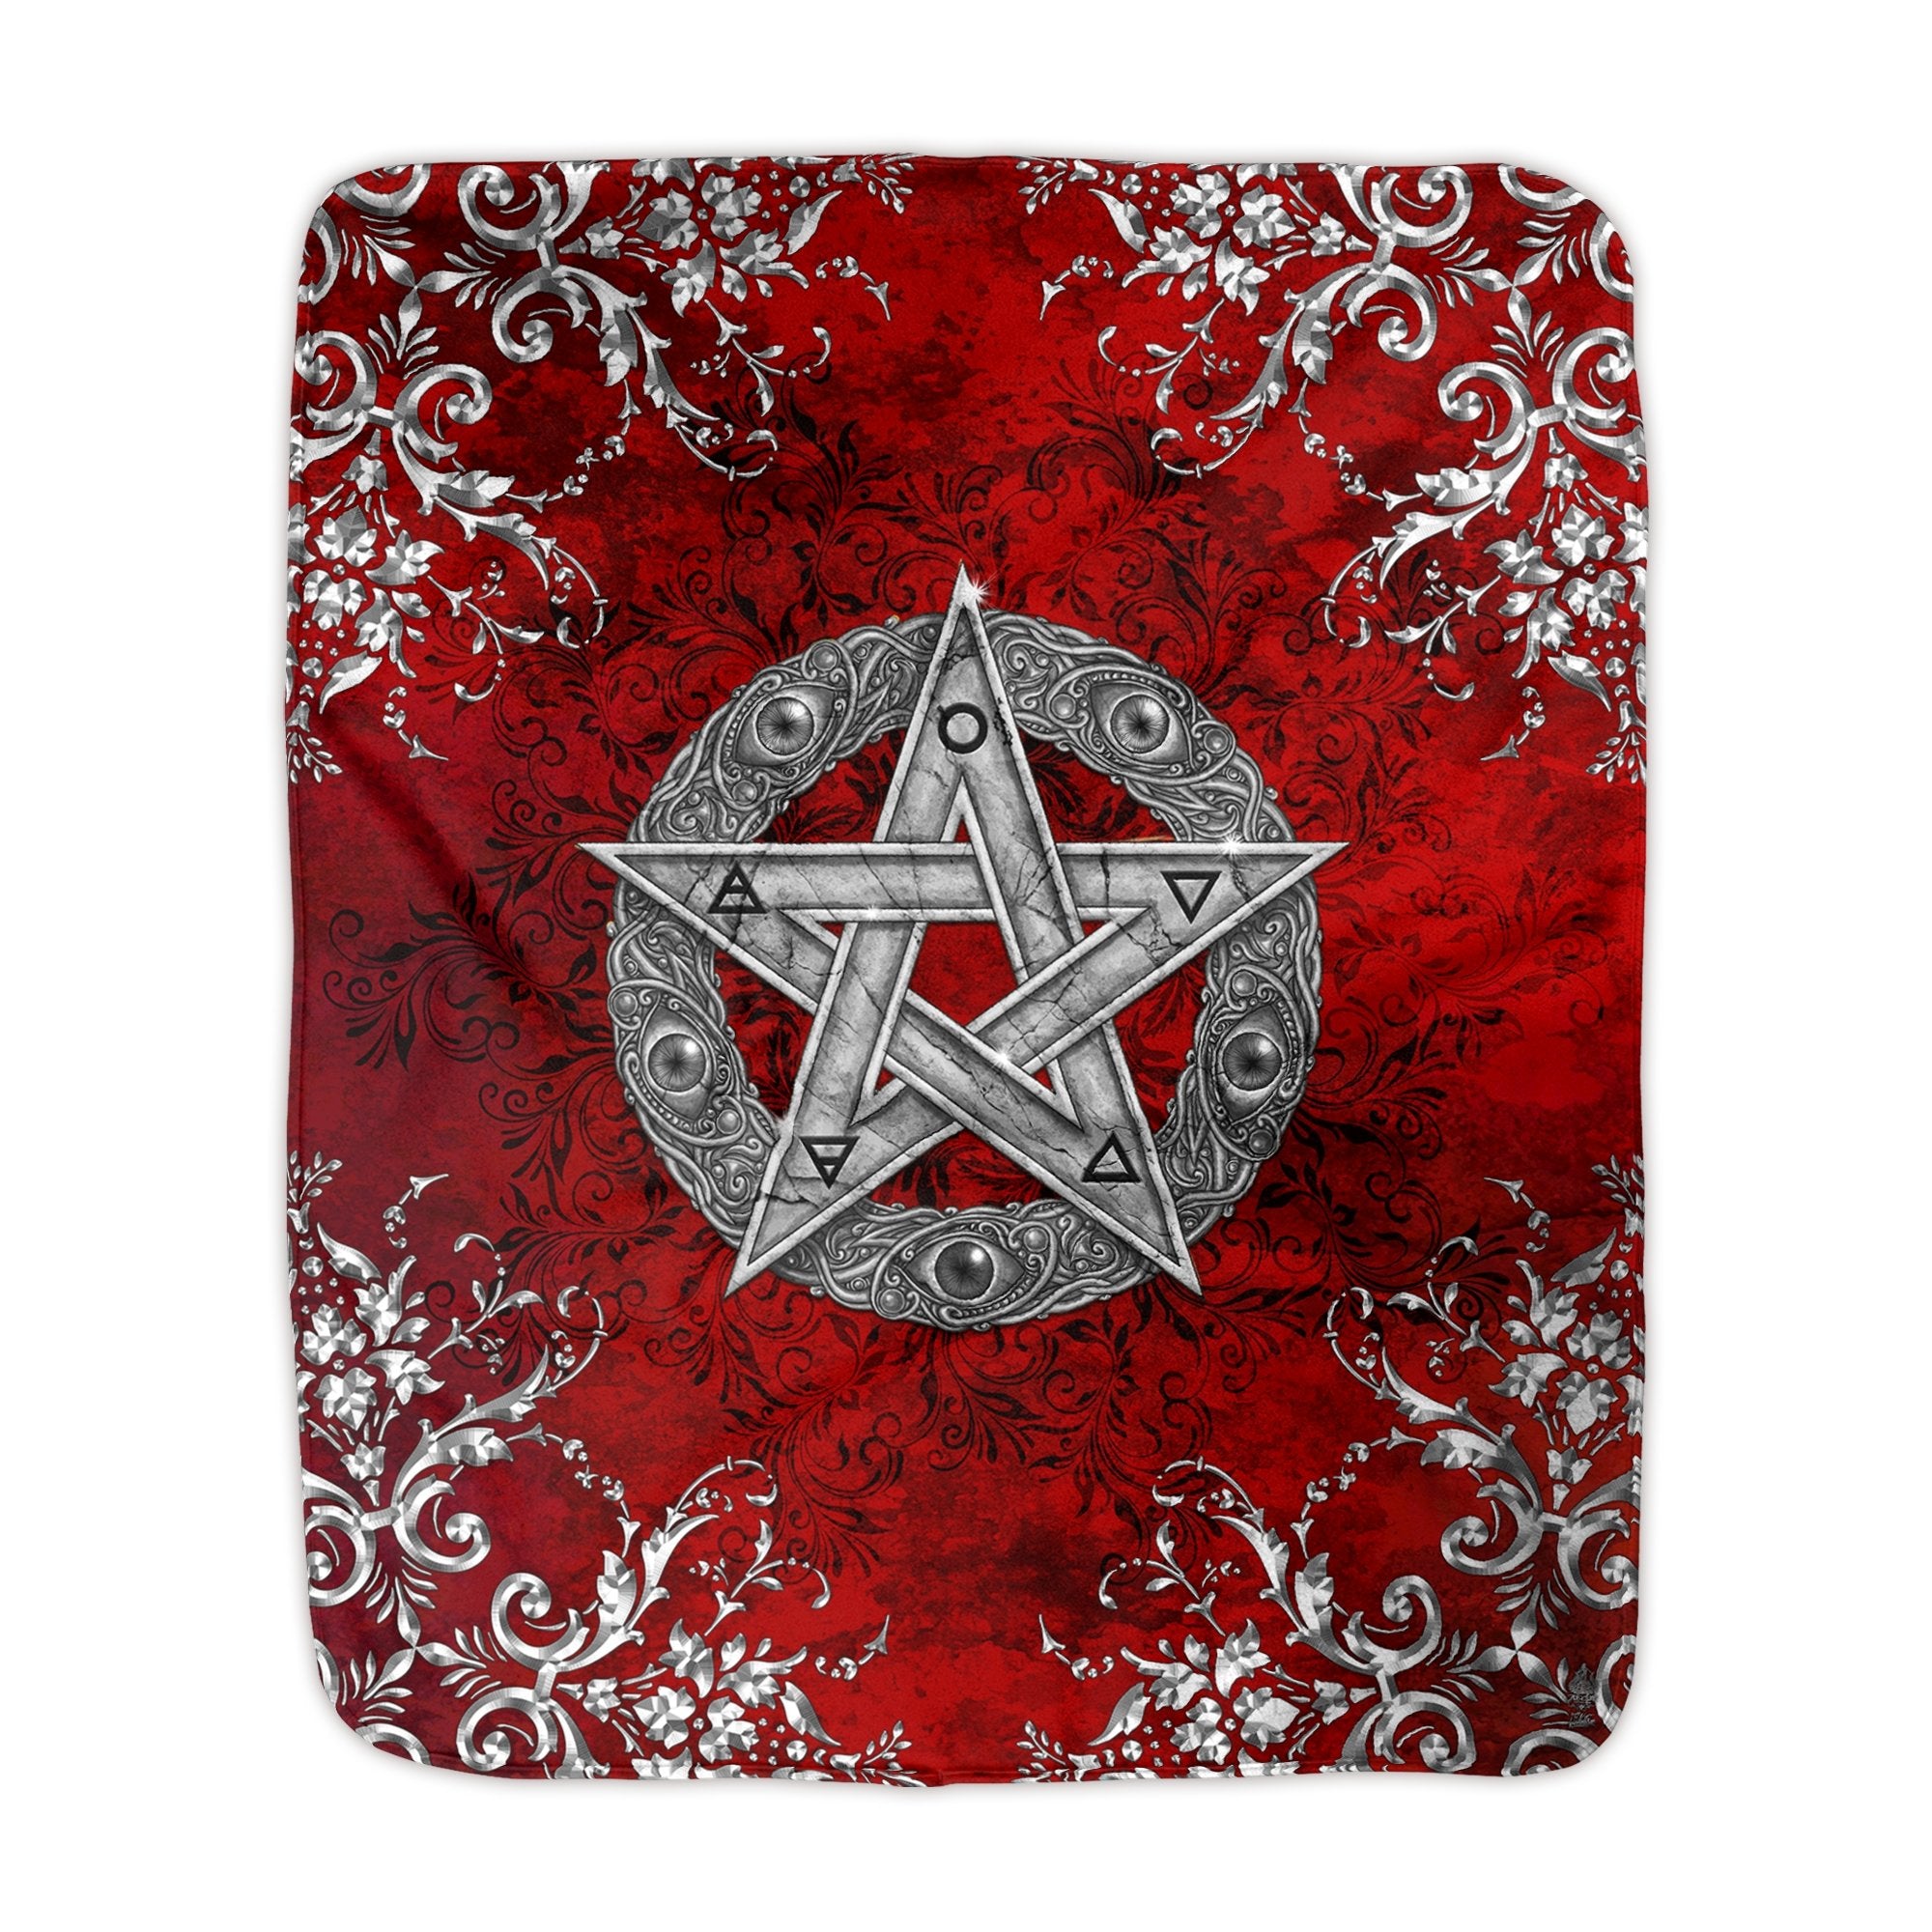 Wiccan Throw Fleece Blanket, Pagan Decor, Witchy Room - Silver Pentacle - Abysm Internal